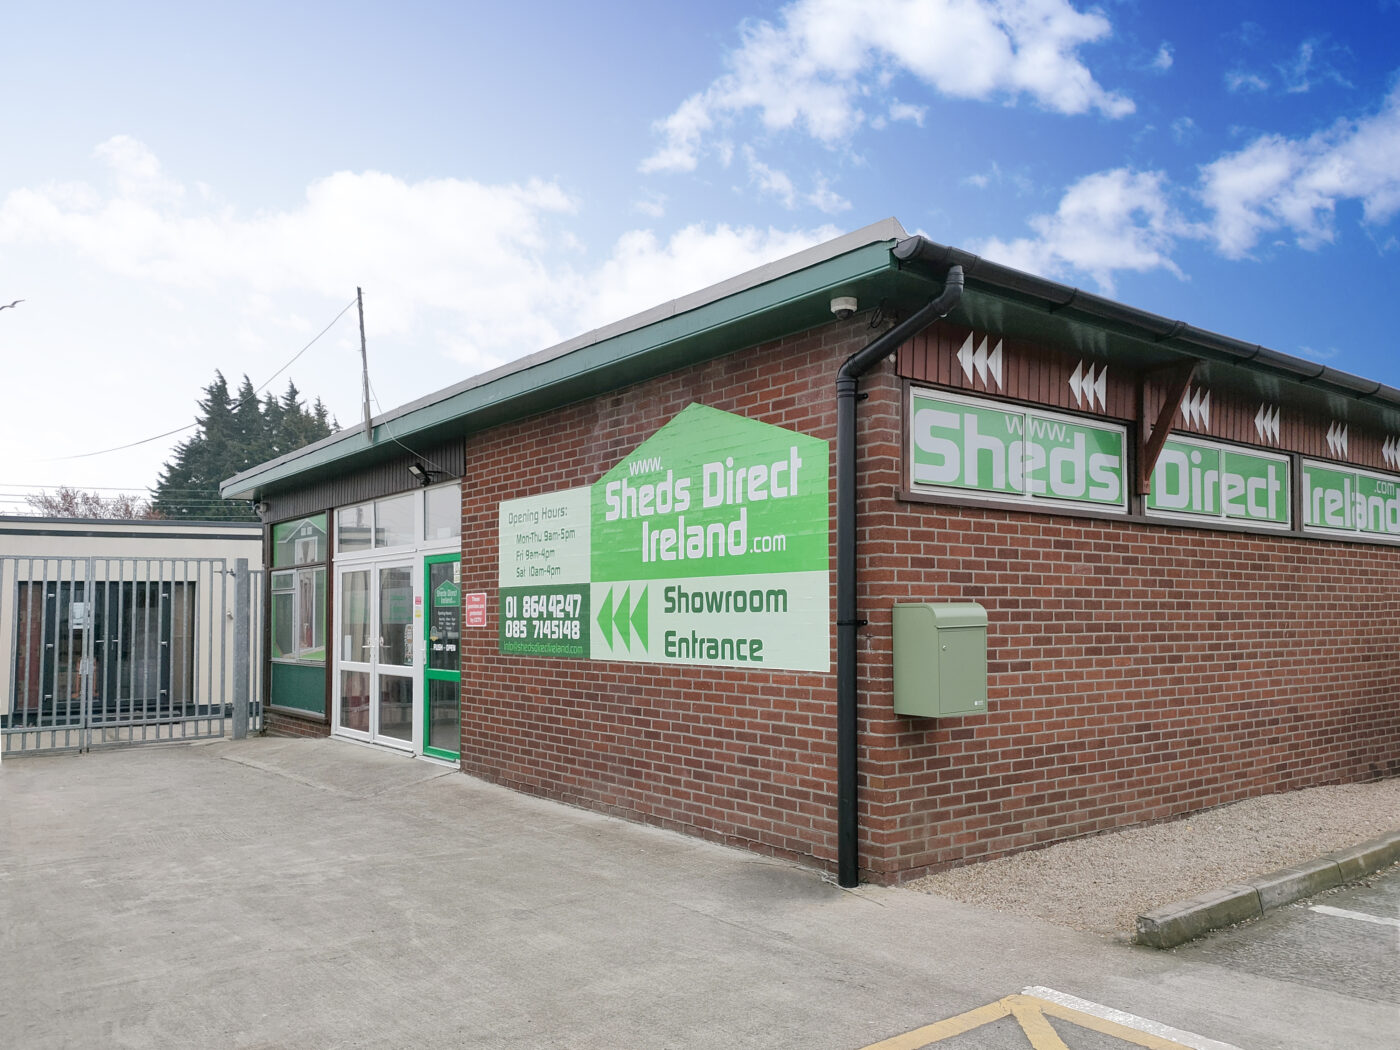 The Sheds Direct Ireland showroom as seen from the driveway outside. The building is a red-brick building, with a green, vinyl wrap of the sheds direct Ireland logo on the side. The sky above is a bright blue, like a Summers Day